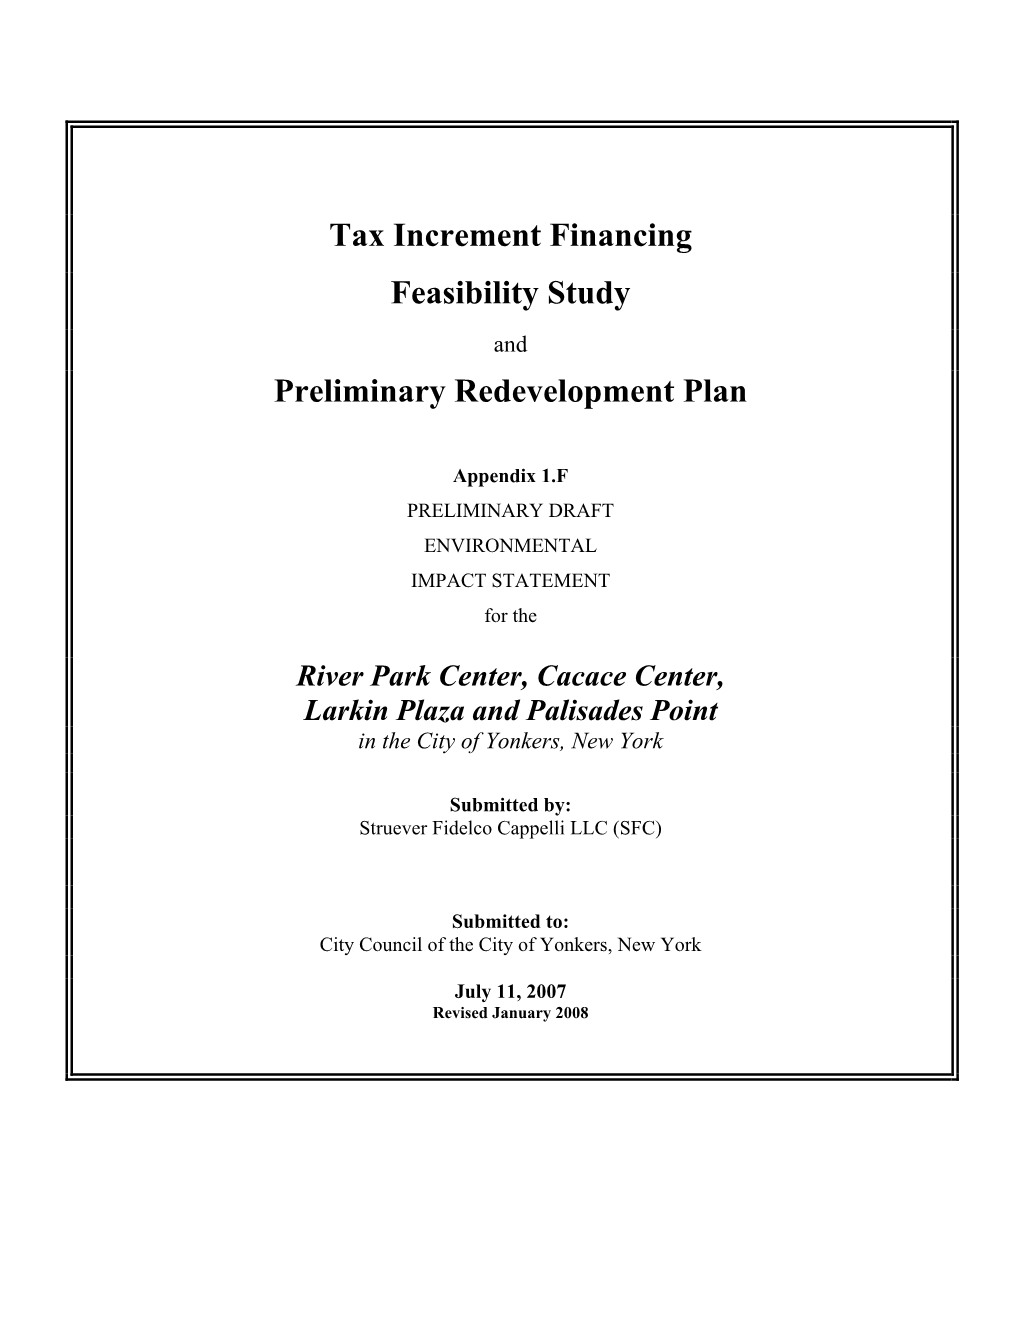 Tax Increment Financing Feasibility Study and Preliminary Redevelopment Plan